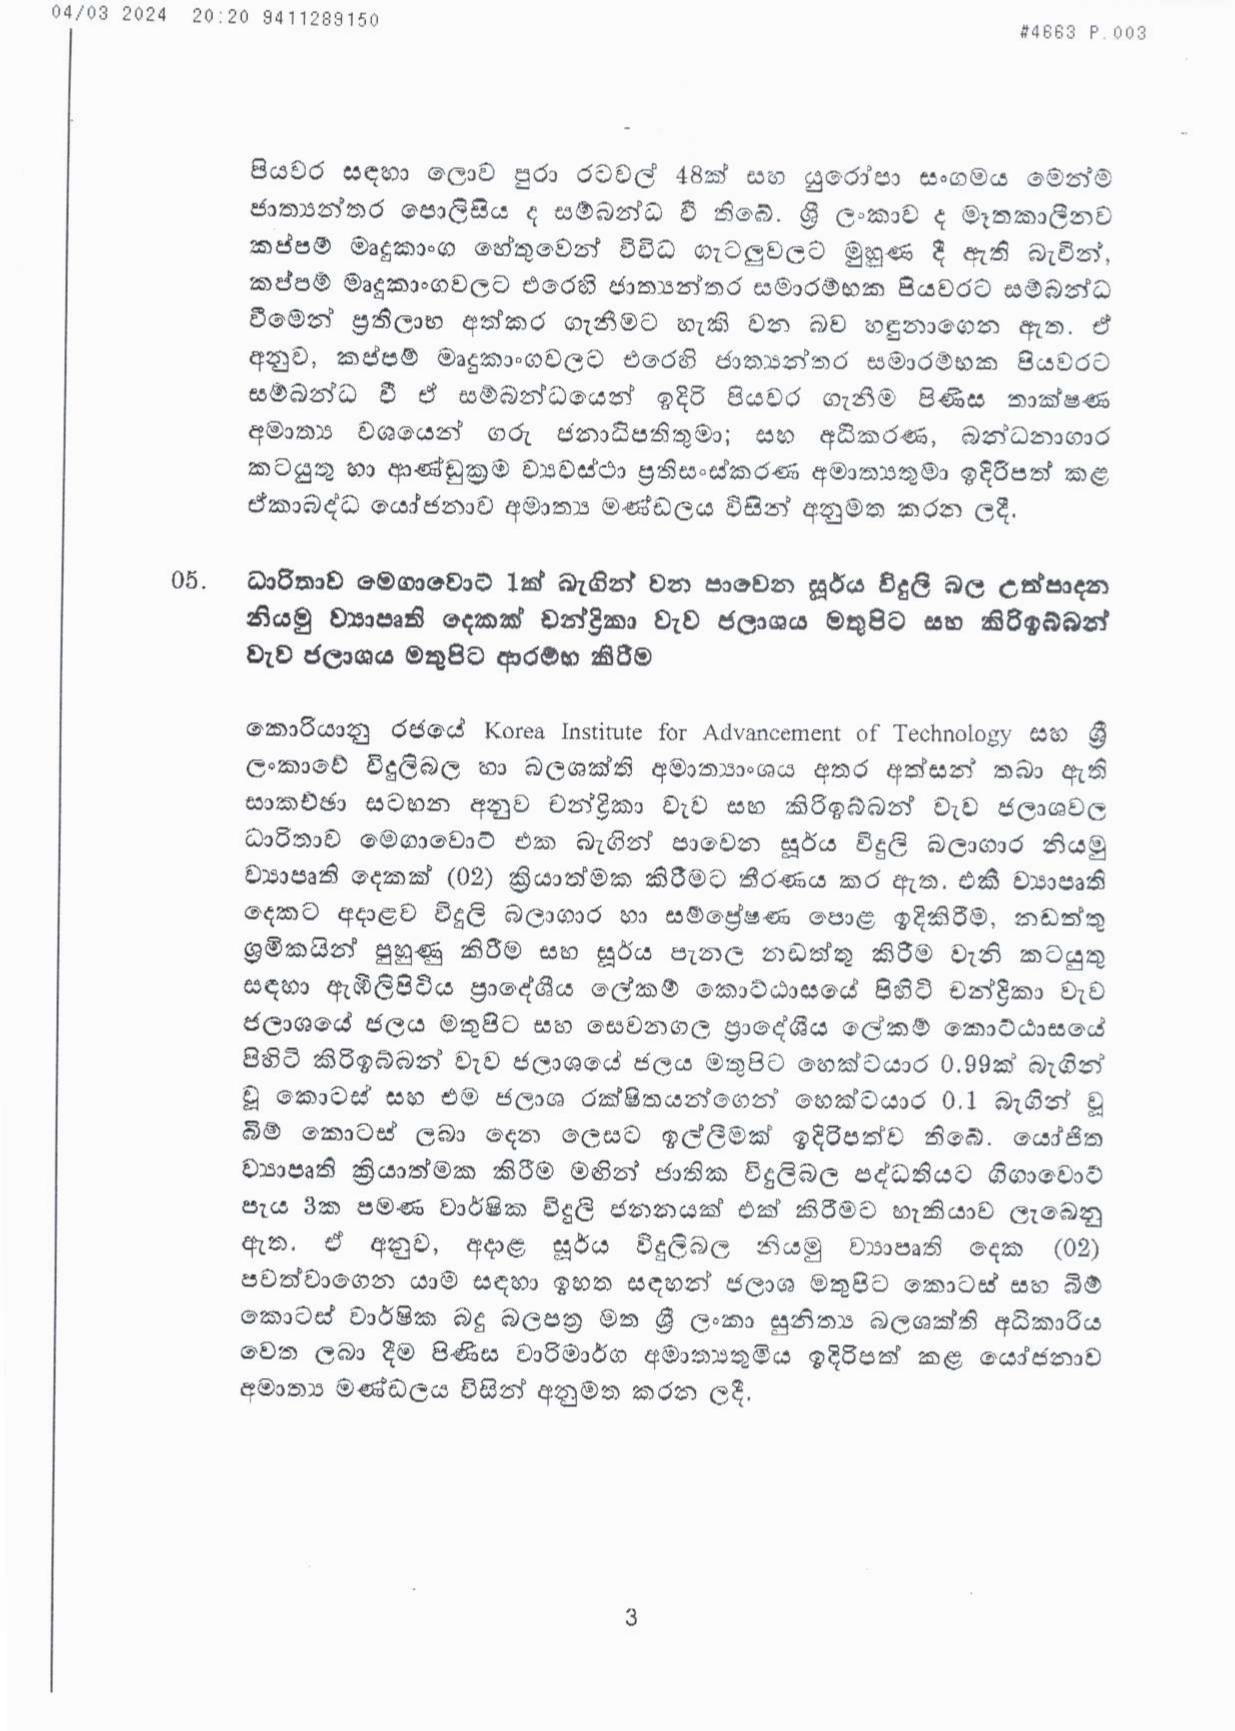 Cabinet Decision on 04.03.2024 page 0003